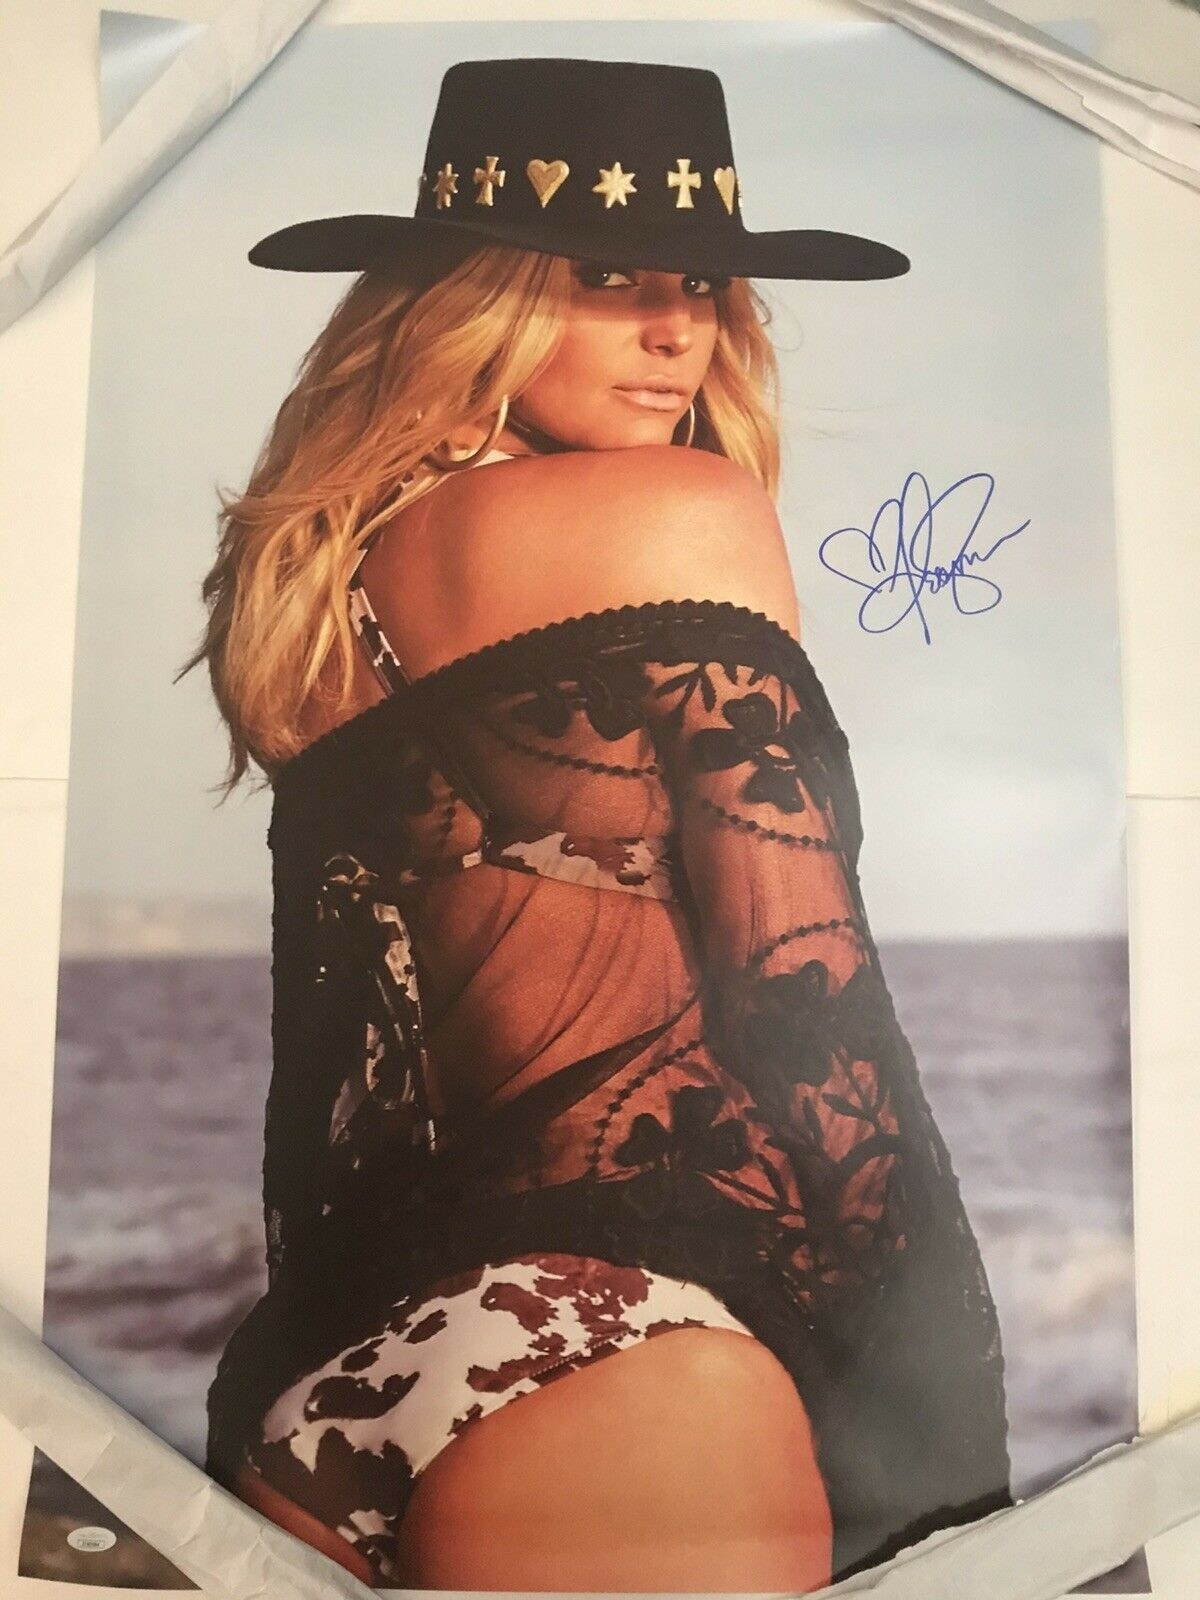 An autographed photo of Jessica Simpson at the beach